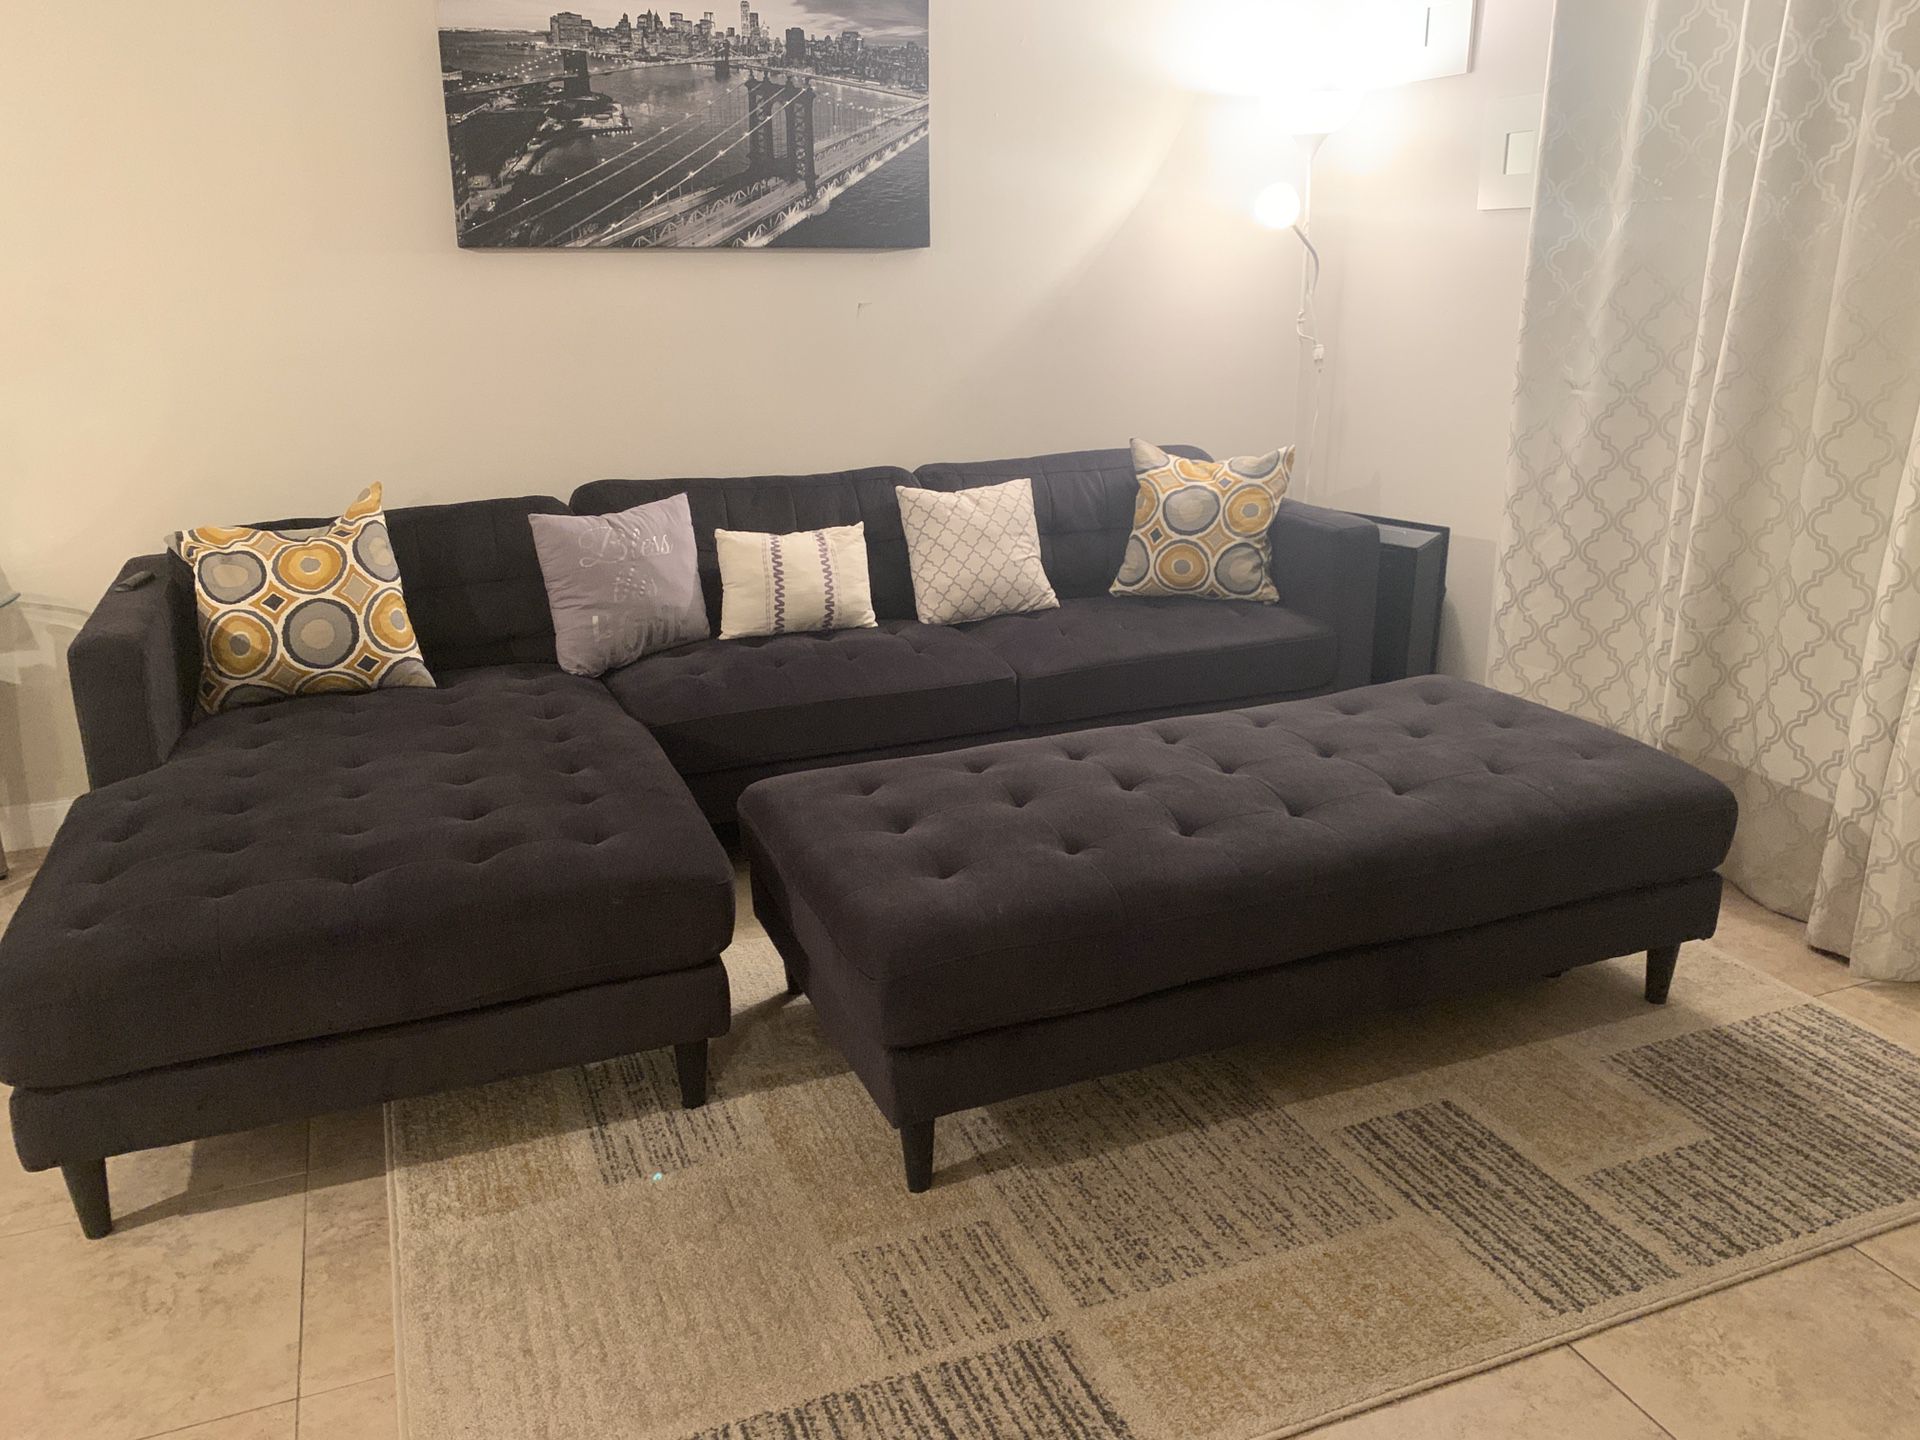 Couch & Table for sale